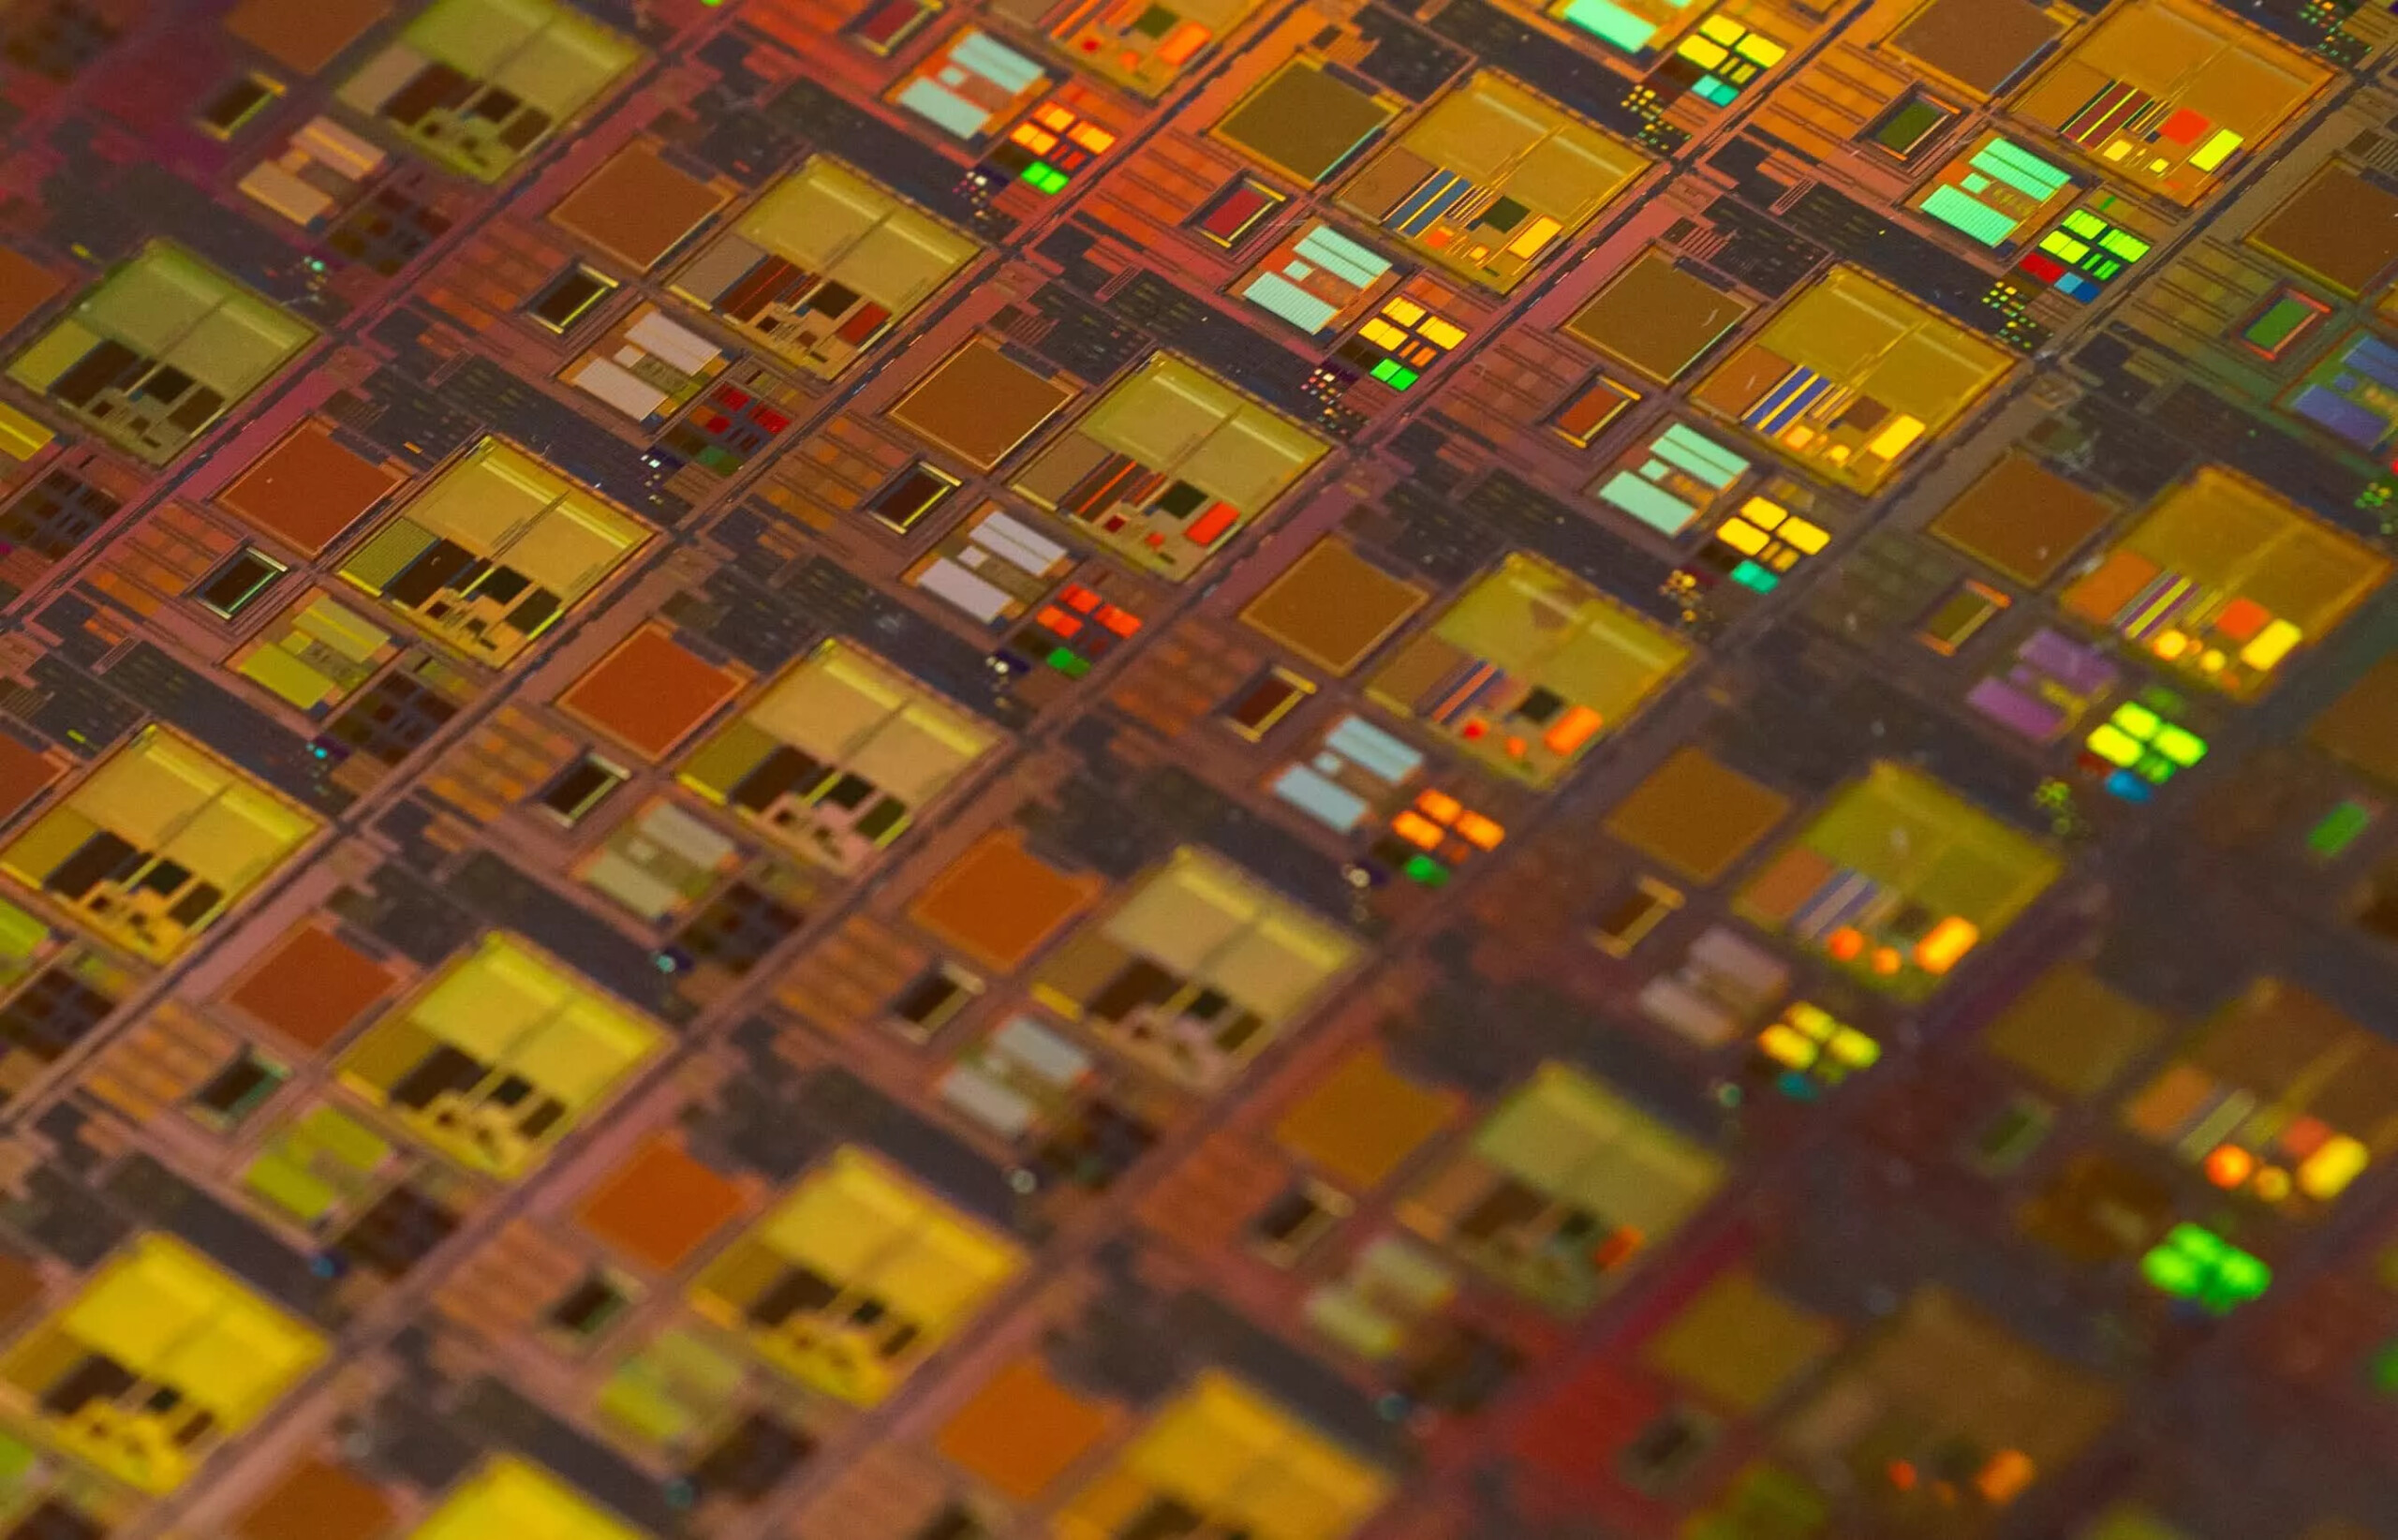 Google IT hardware manager says Moore’s Law has been dead for 10 years